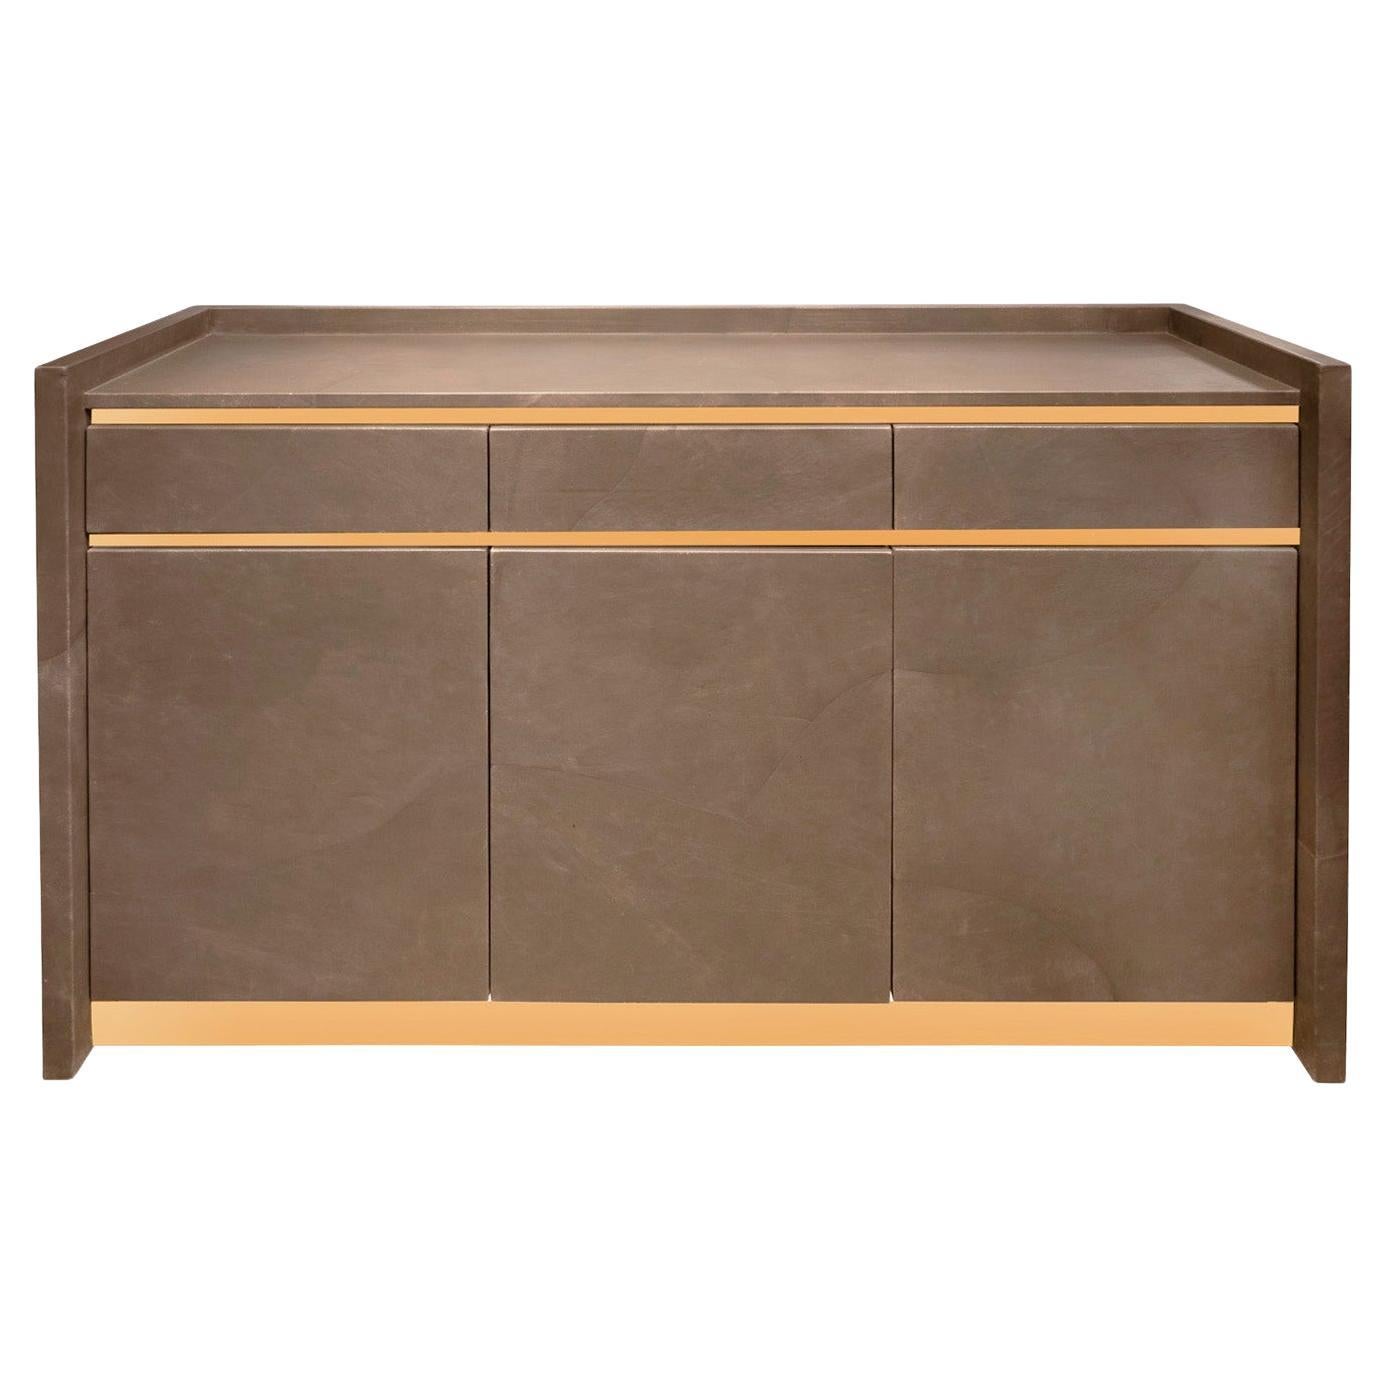 Karl Springer Rare Credenza in Taupe Leather and Brass 1985 'Signed and Dated' For Sale